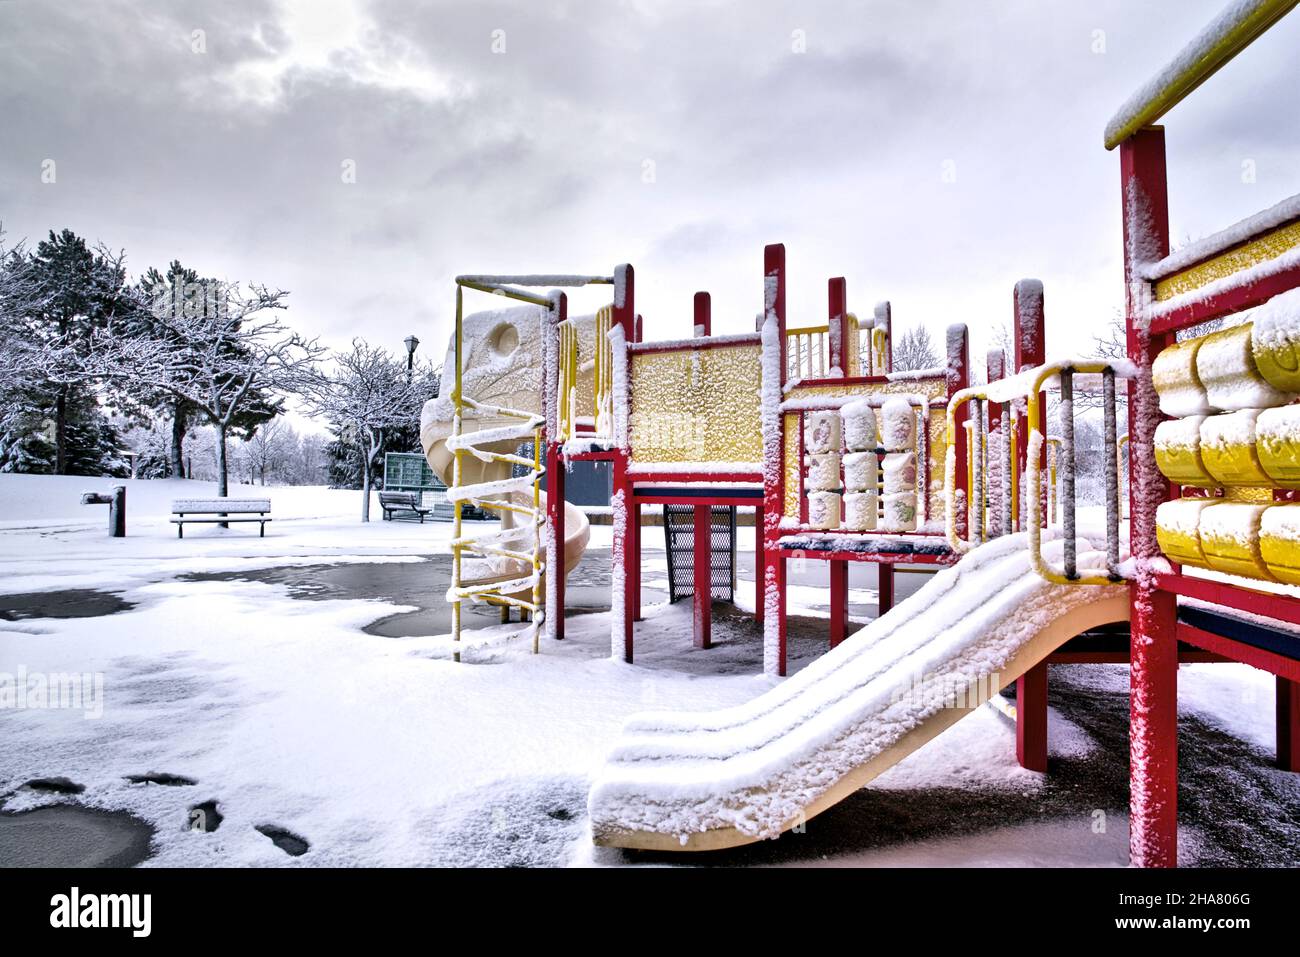 Slide and swing in the playground at the public park in winter Stock Photo